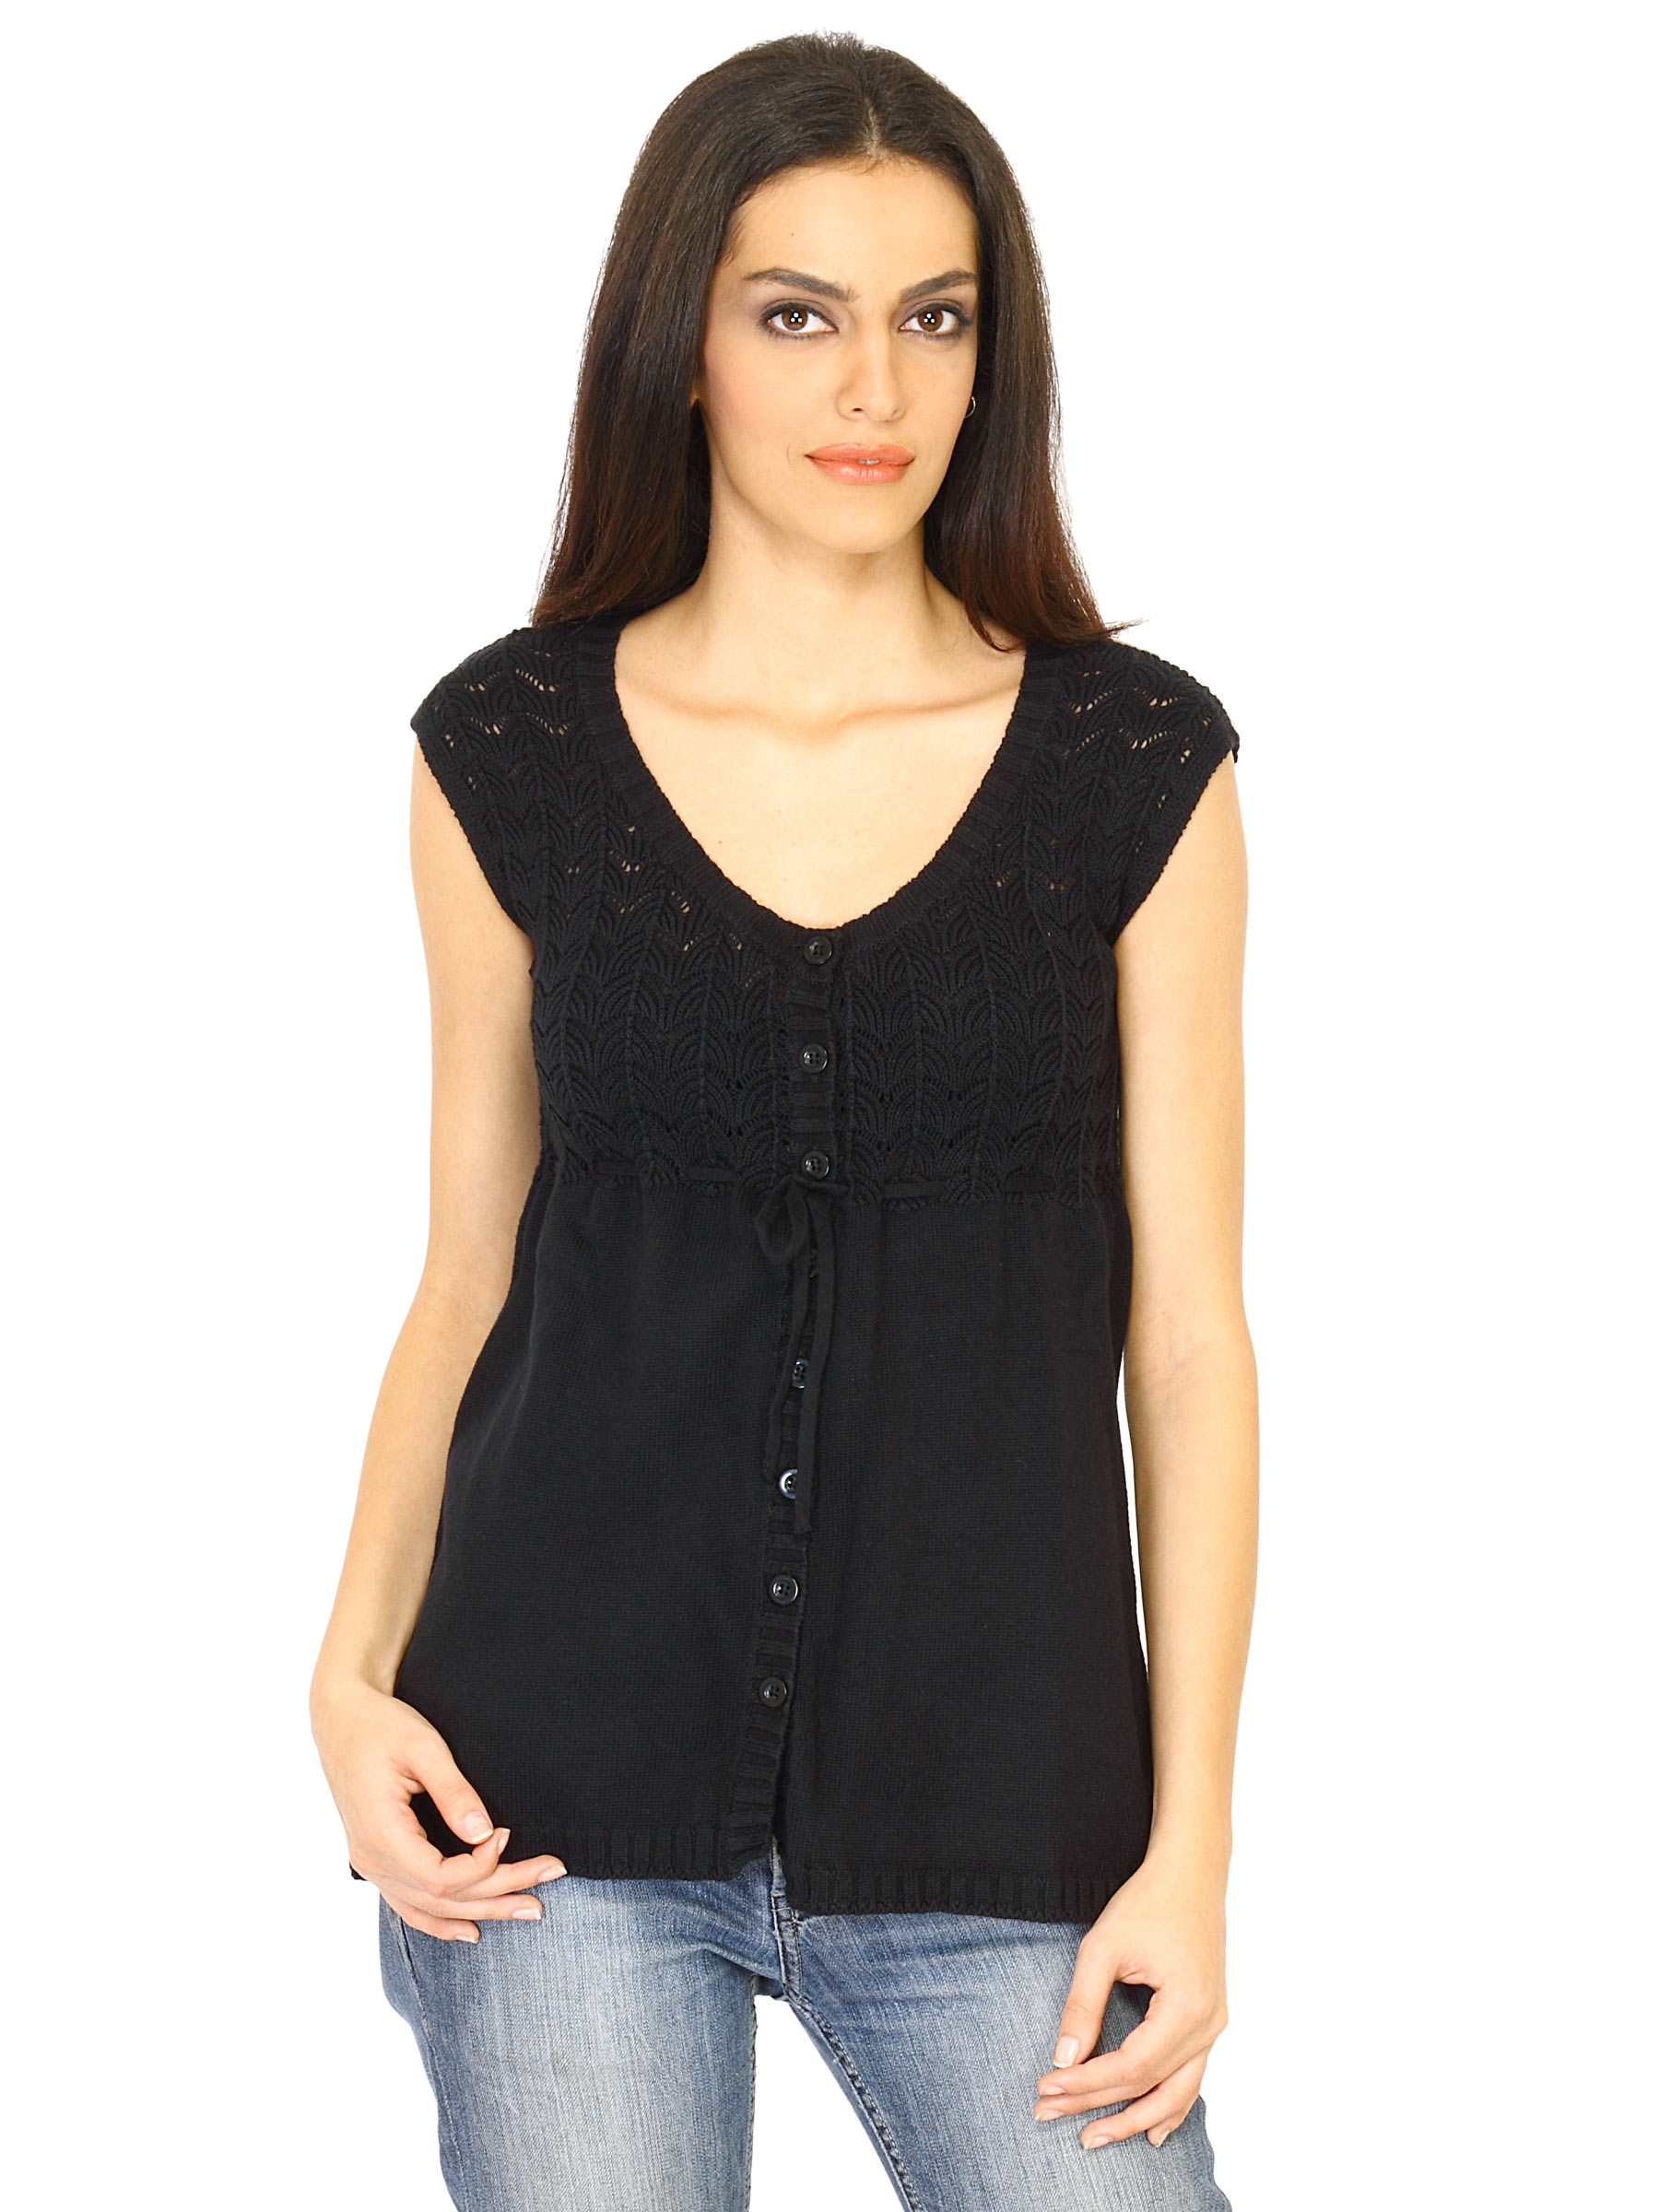 United Colors of Benetton Women Solid Black Tops